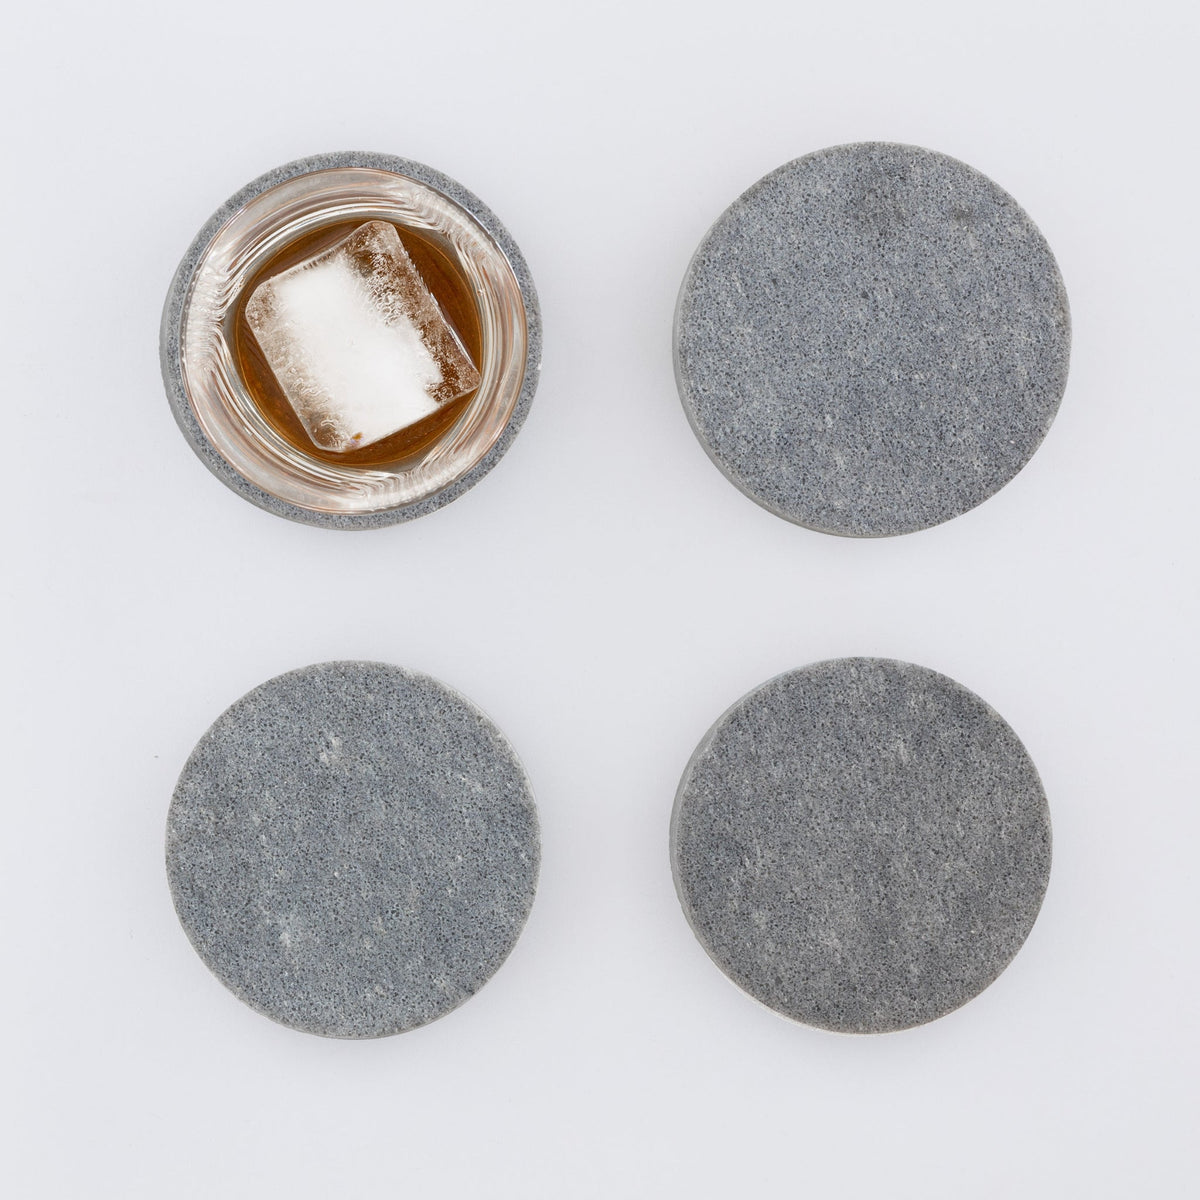 4 round marble like coasters in Caesarstone 4033 Rugged Concrete. Shown with whiskey glass and large ice cube.